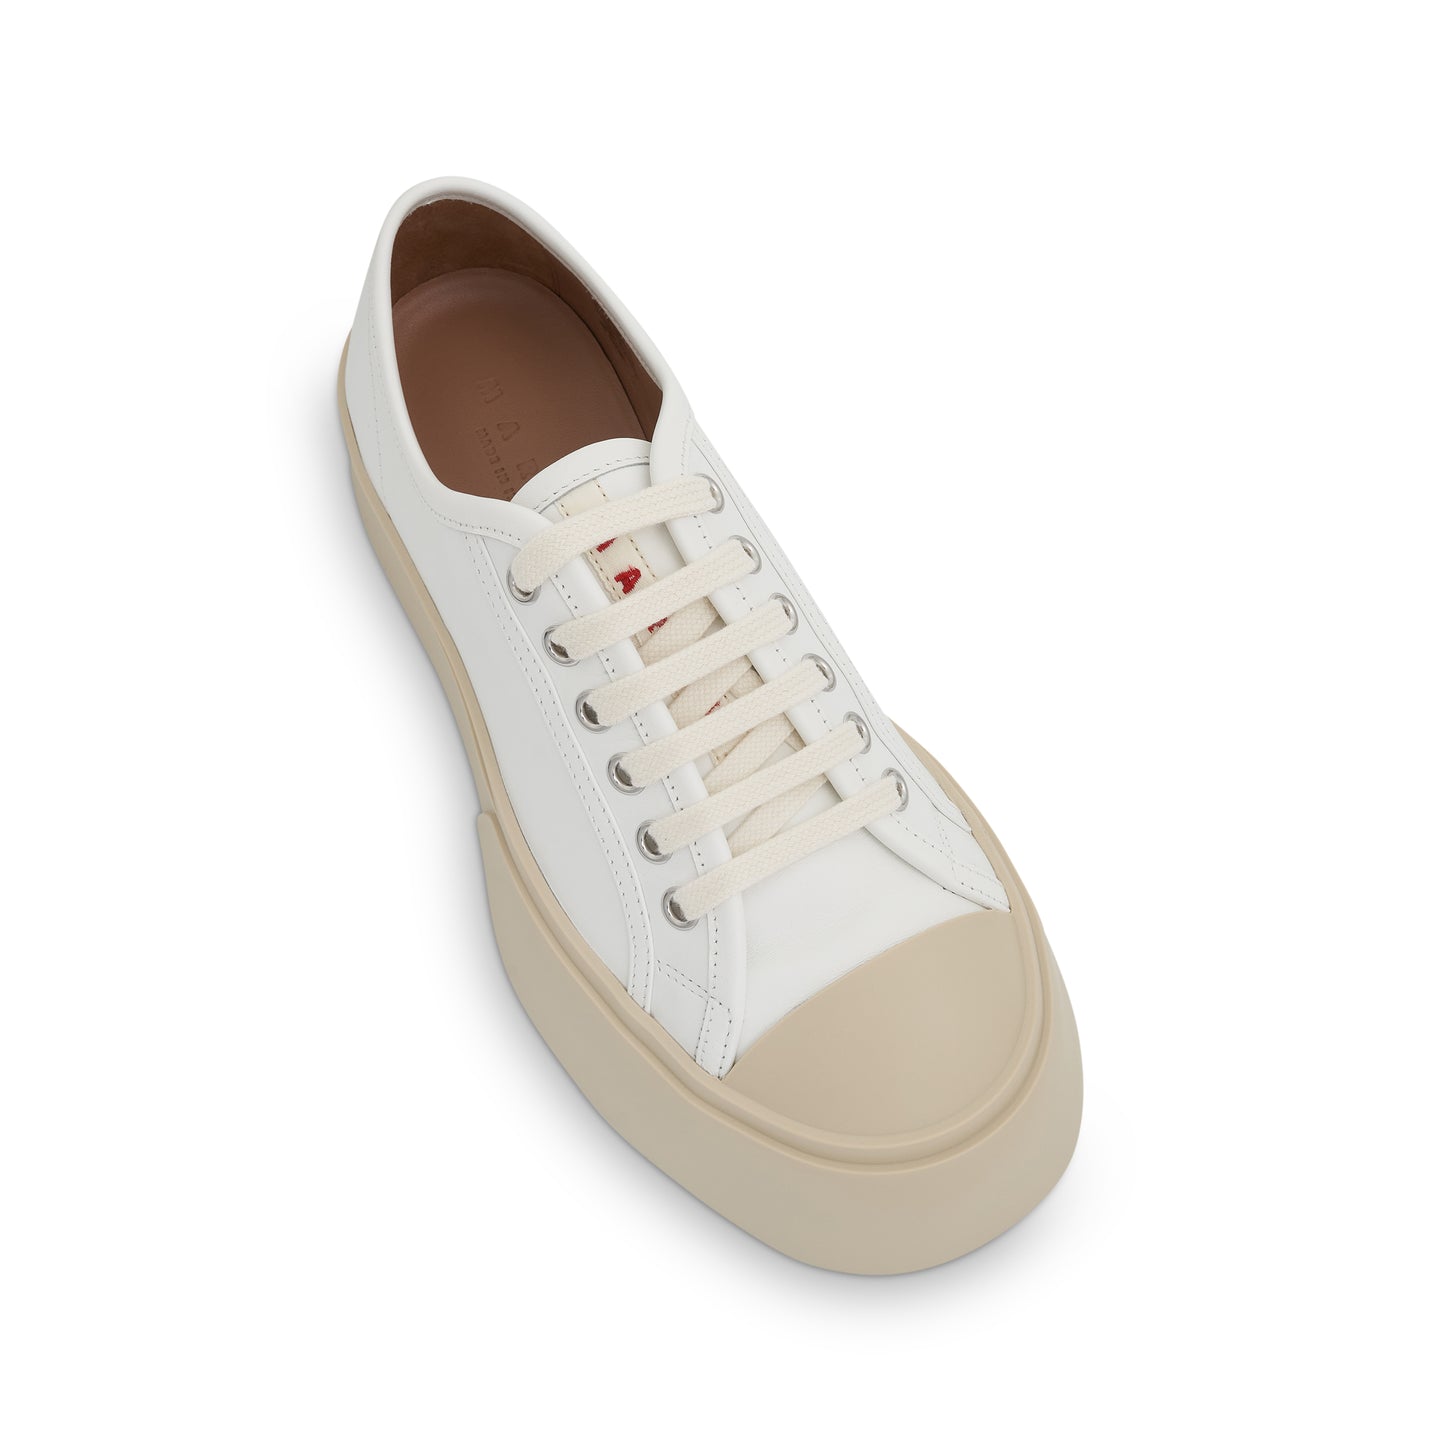 Pablo Lace Up Sneaker in Lily White